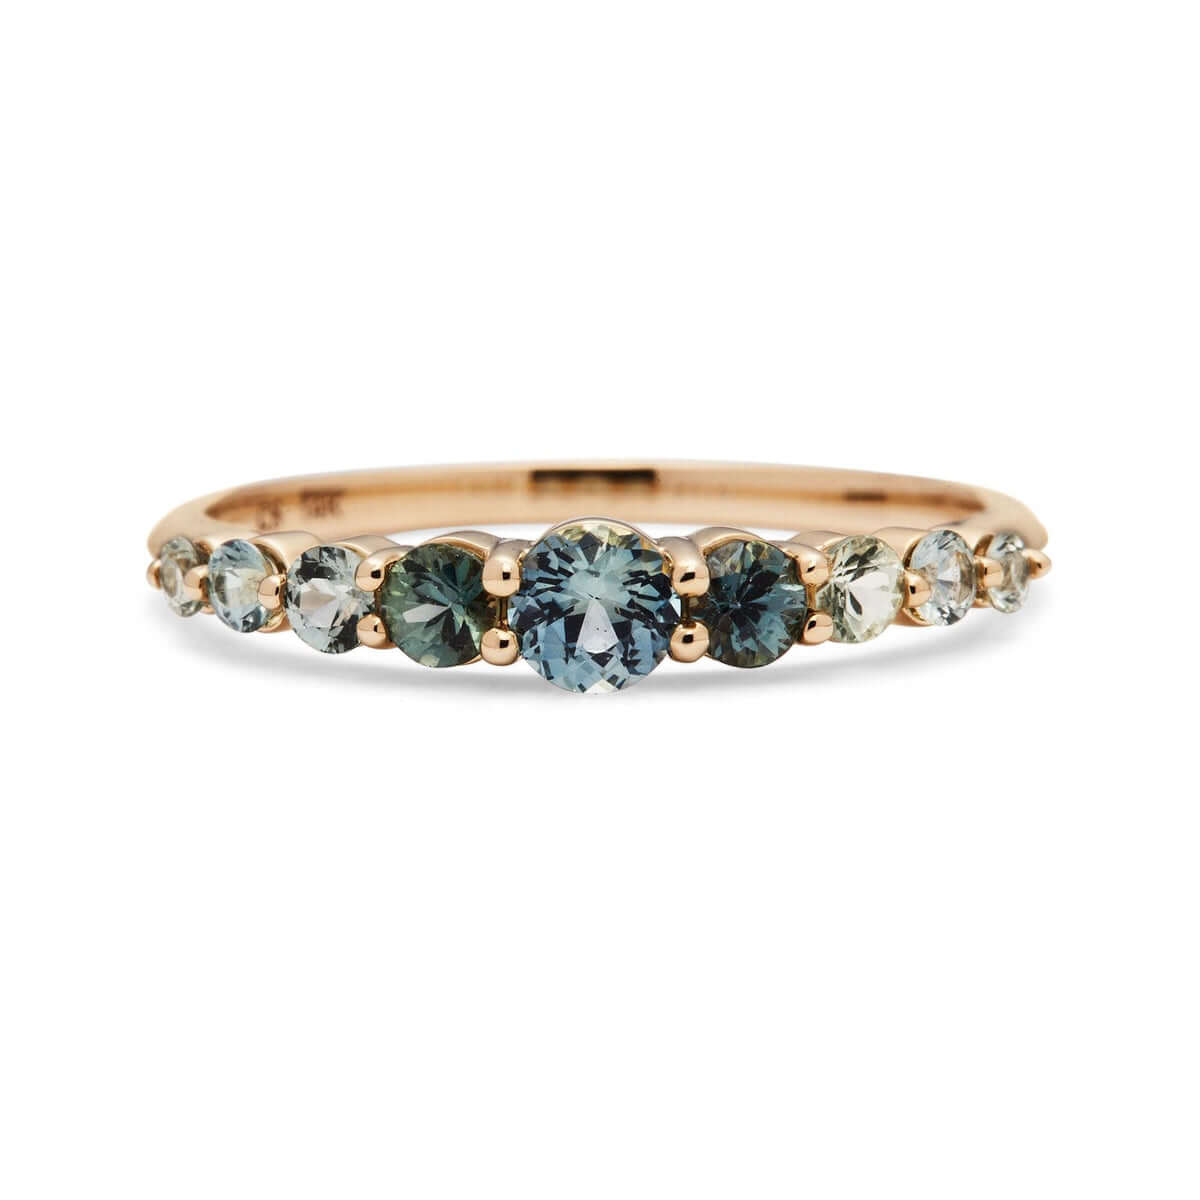 Close-up of Edie Australian Sapphire Ring showcasing a gradient of blue and green sapphires set in recycled 14k gold.